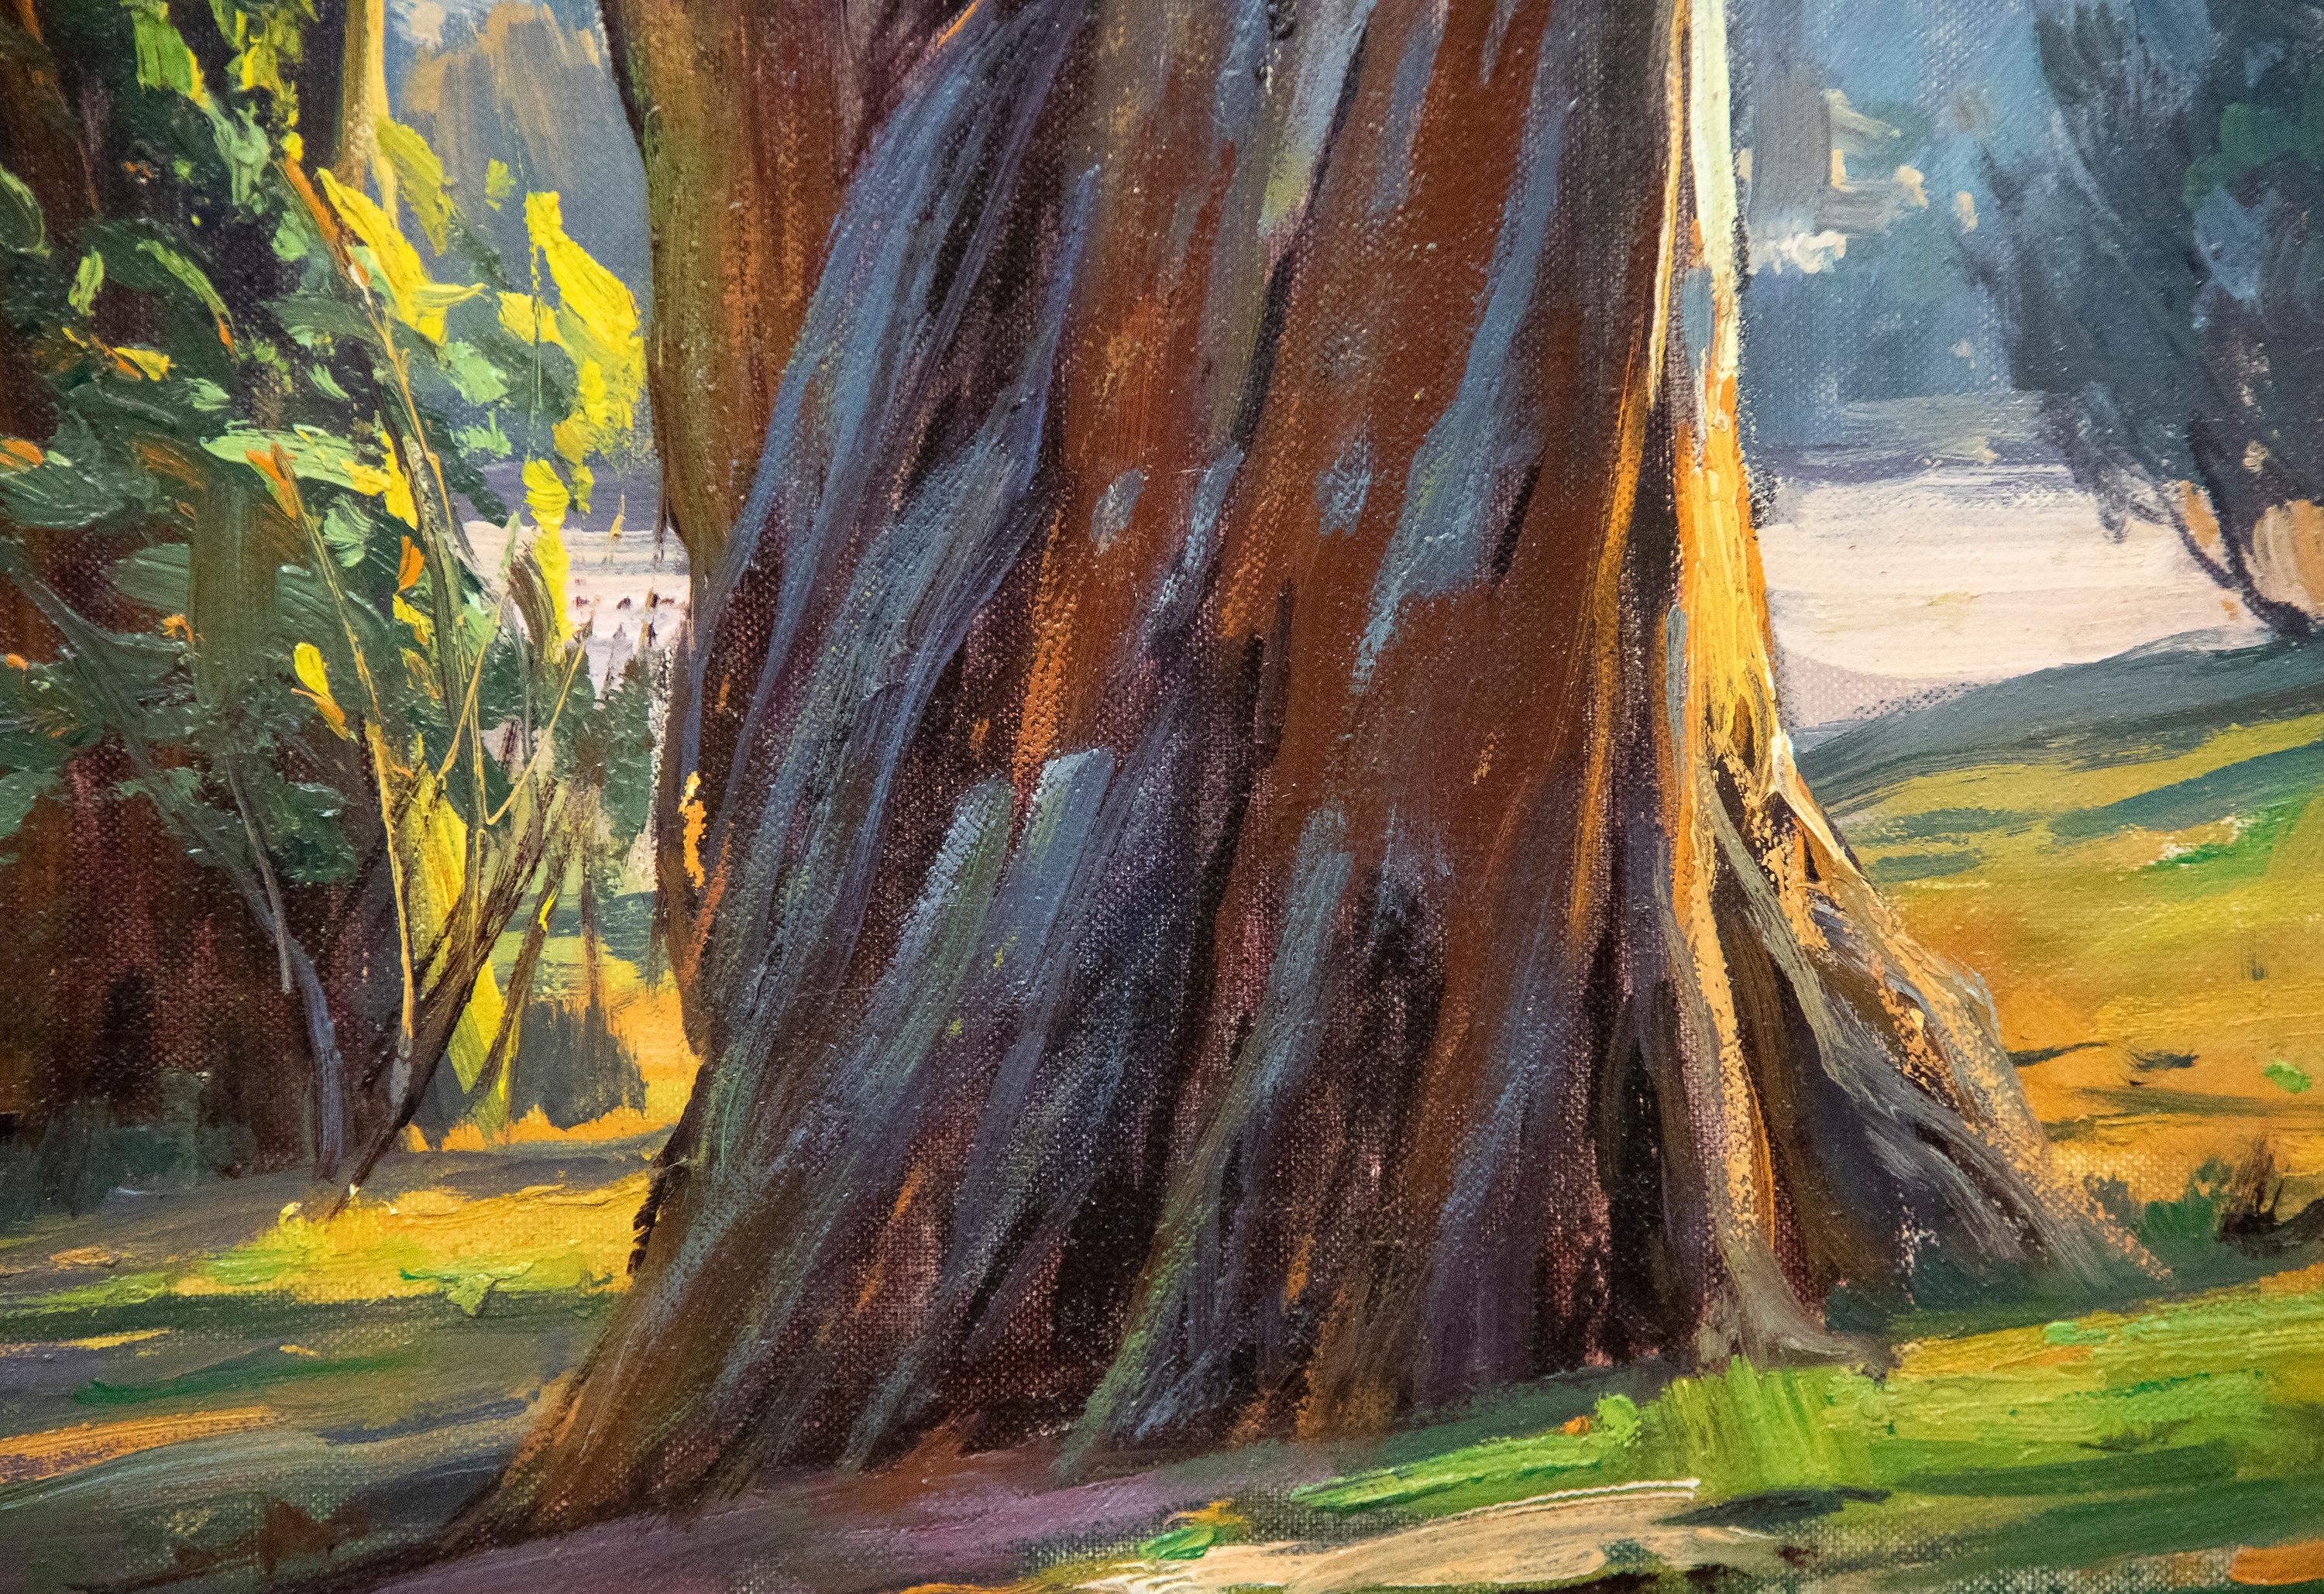 Stately Eucalypti - Modern Painting by Paul Grimm